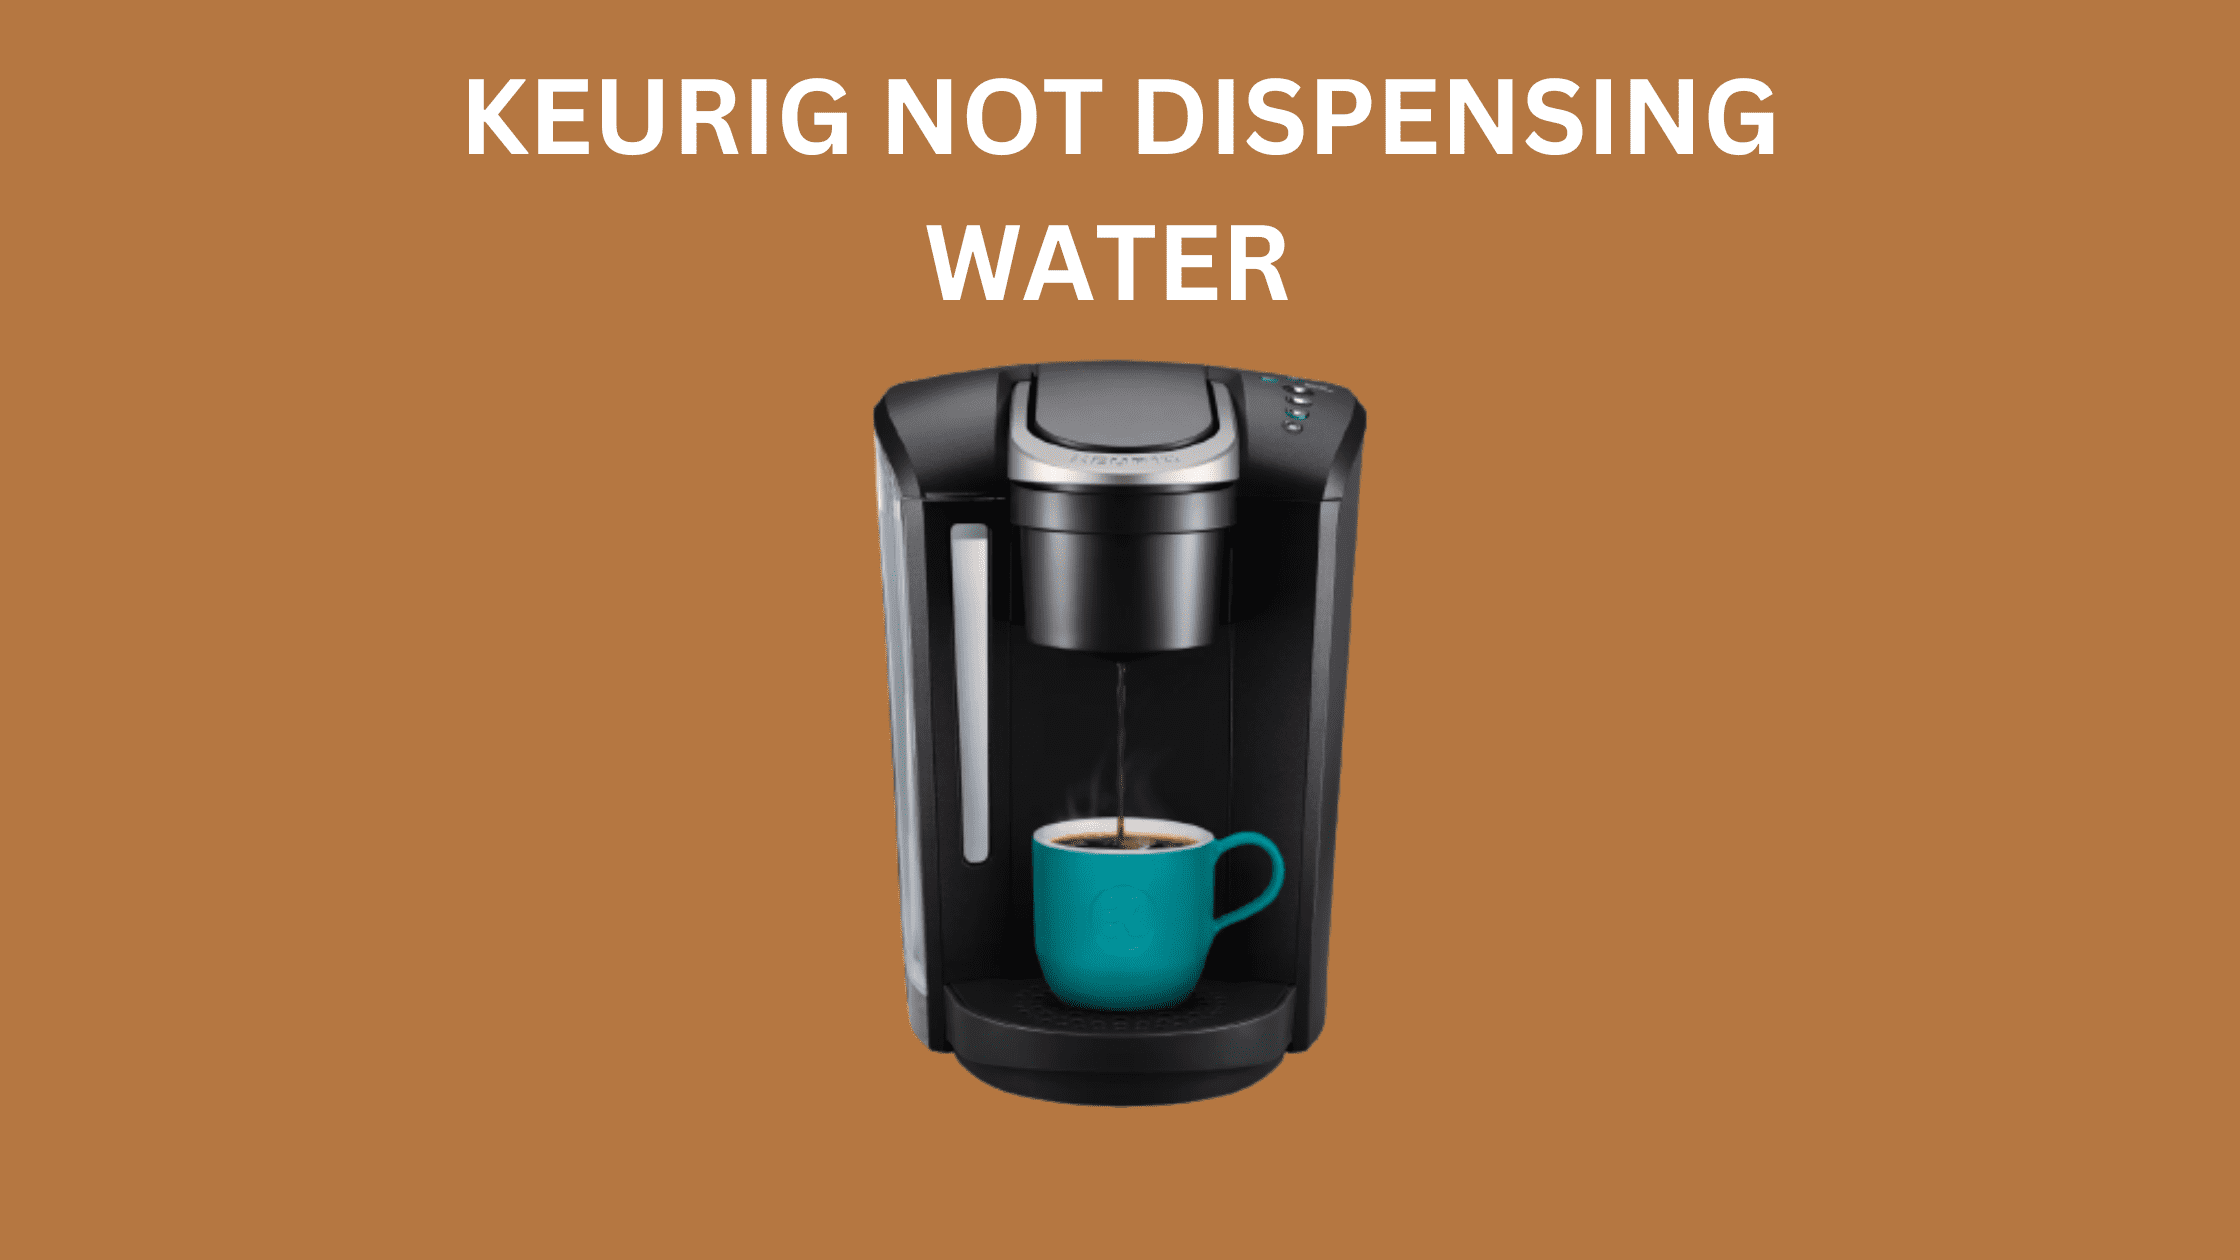 How To Fix A Keurig Not Dispensing Water: 6 Easy Fixes